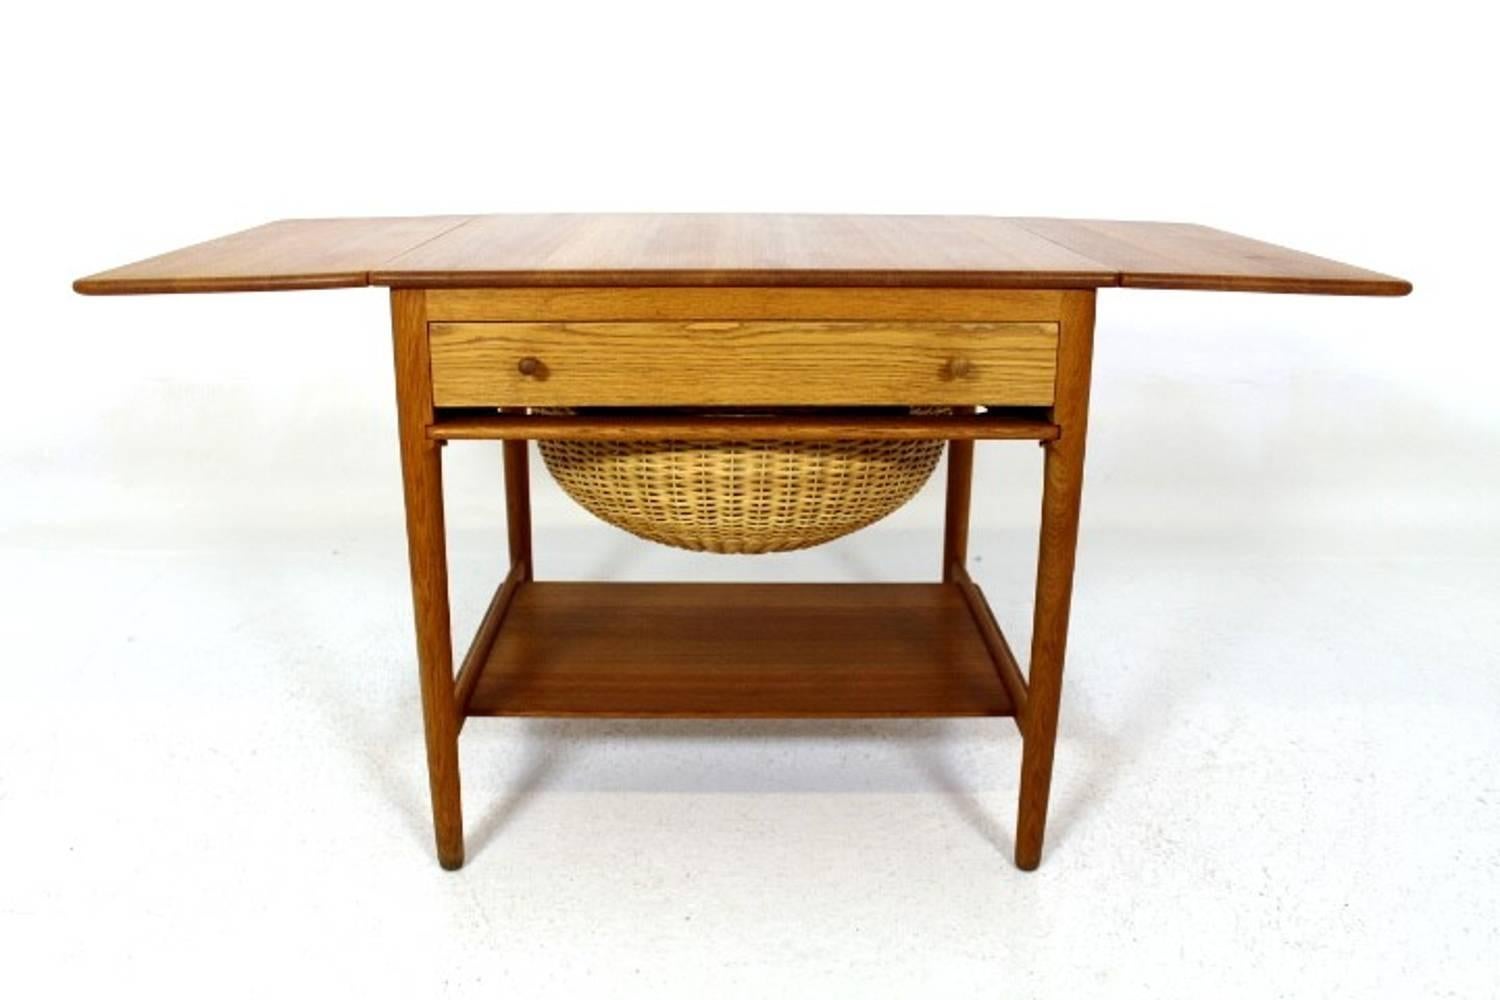 Hans J. Wegner sewing table in solid oak with two drop-leaves, front drawer and a woven cane basket. Designed by Hans J. Wegner 1959. Manufactured by Andreas Tuck. Model AT-33. This is an early production with the solid top.
Measures is W = 64.5 +